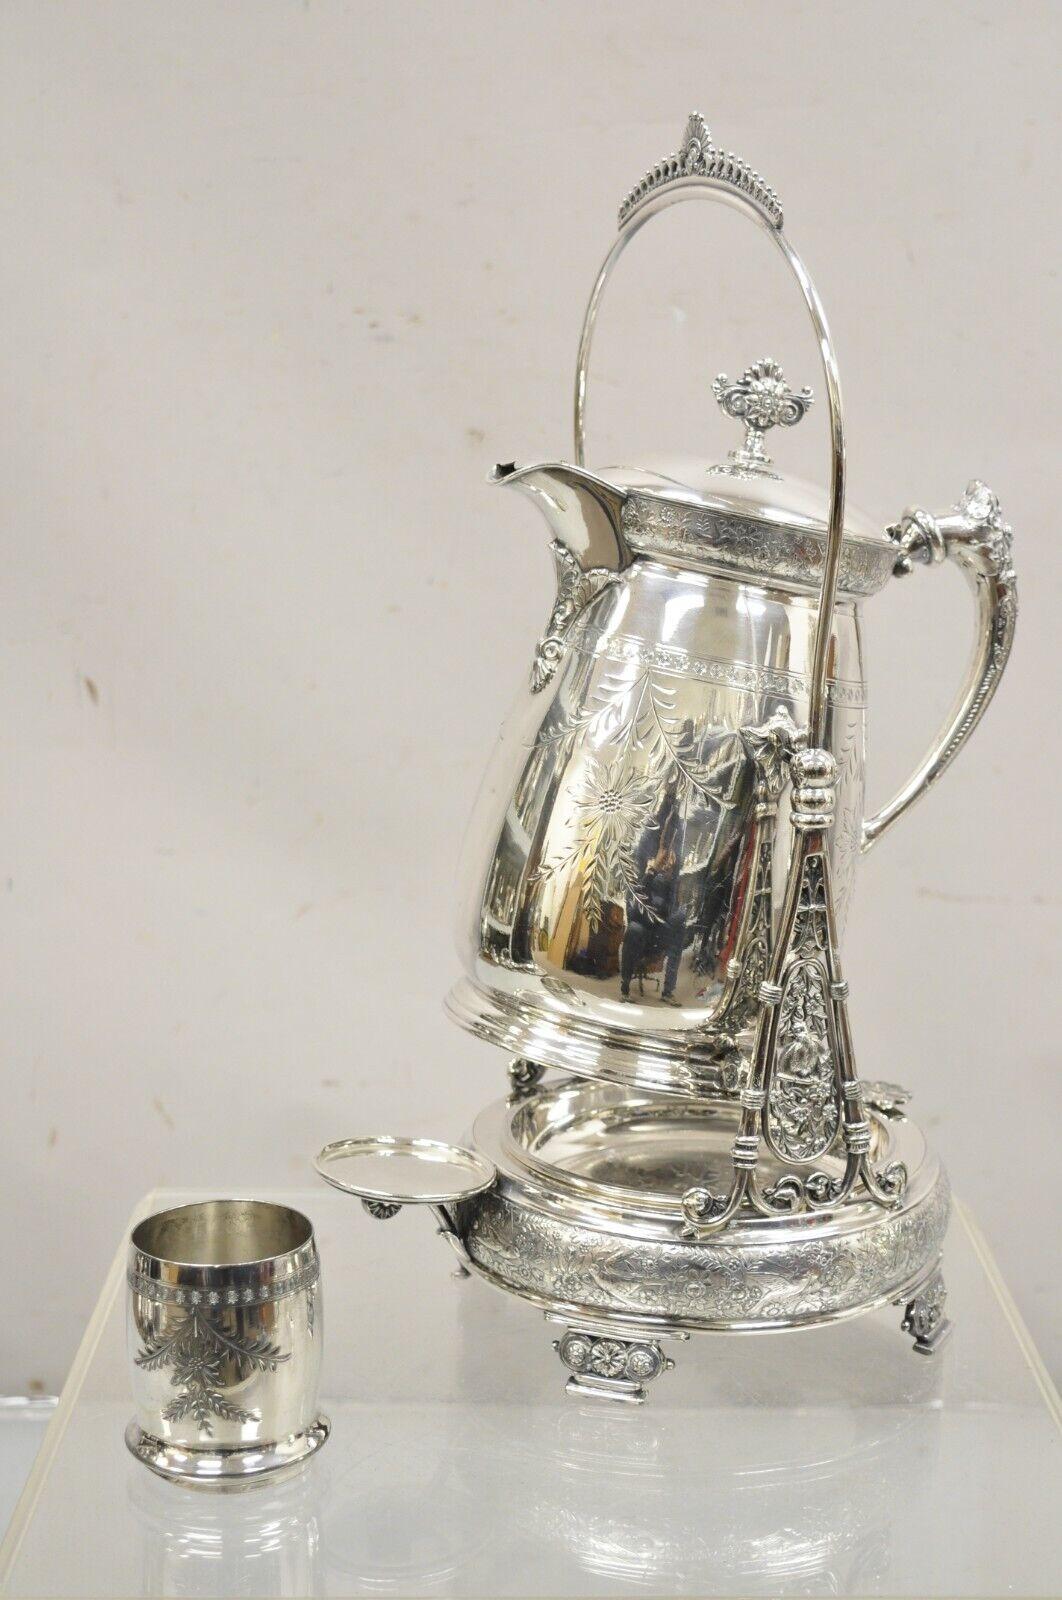 Rogers Smith & Co Silver Plated Victorian Tilting Lemonade Water Pitcher w Stand. Item features Floral repousse with birds and vines, single goblet cup, tilt mechanism for easy pouring, original hallmark, very nice antique item. Circa 1900s.